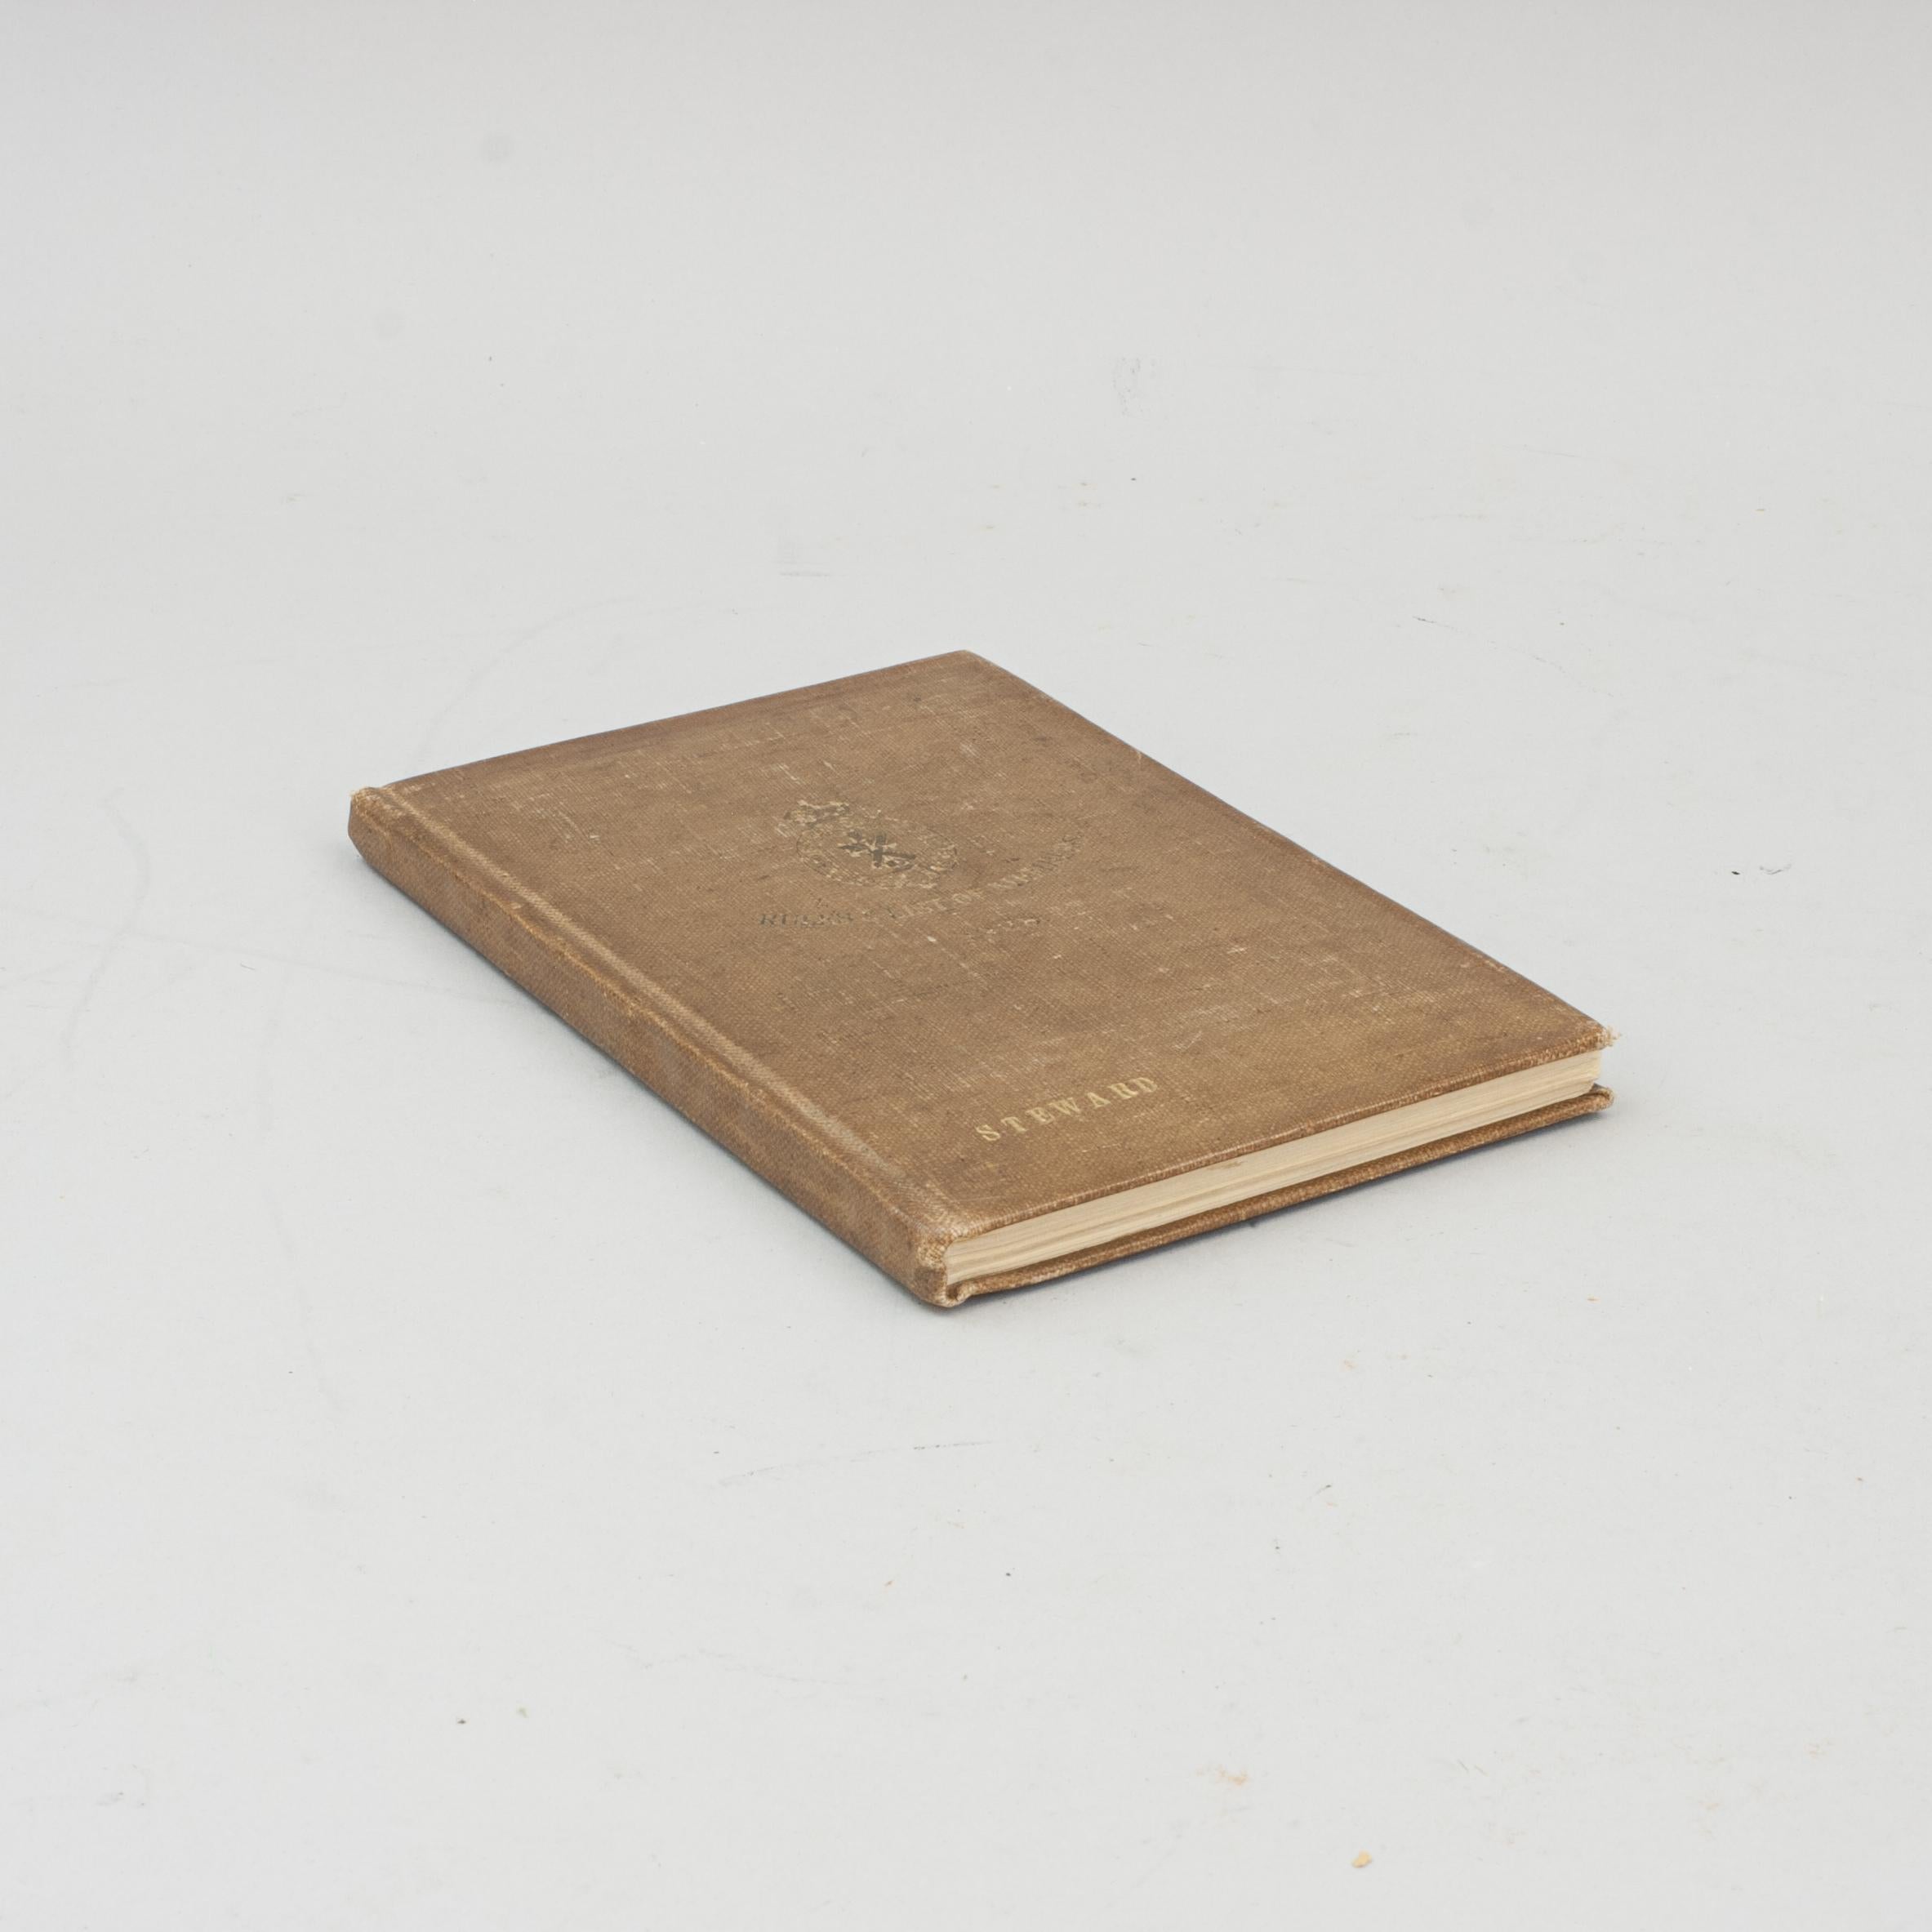 Royal And Ancient Golf Club, St Andrews, Book of 1928 Rules & List Of Members.
A rare 1928 hard bound 'Steward's' edition of the Rules & List Of Members of the Royal & Ancient Golf Club of St Andrews. Original brown boards are faded and have gilt